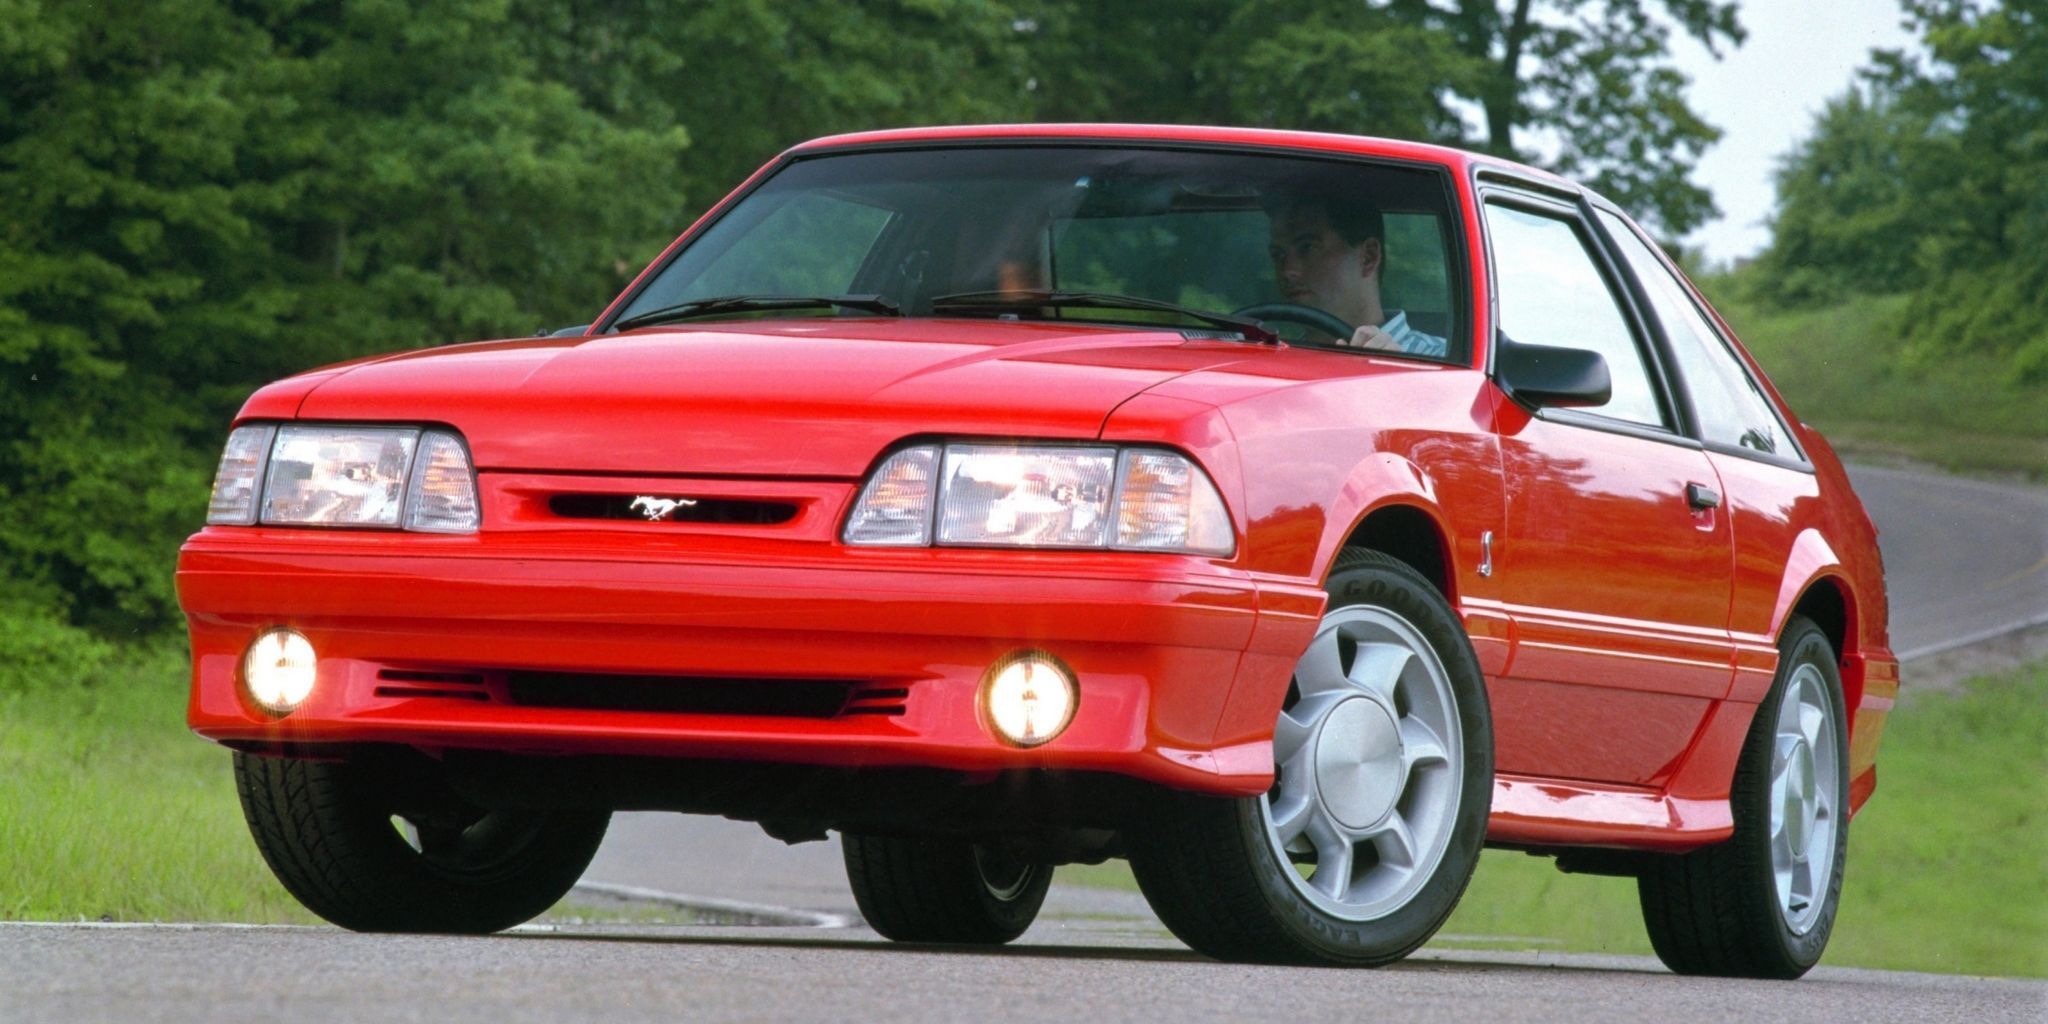 1993 Ford Mustang Gt: The Fox body car that put an end to this generation of muscle cars.